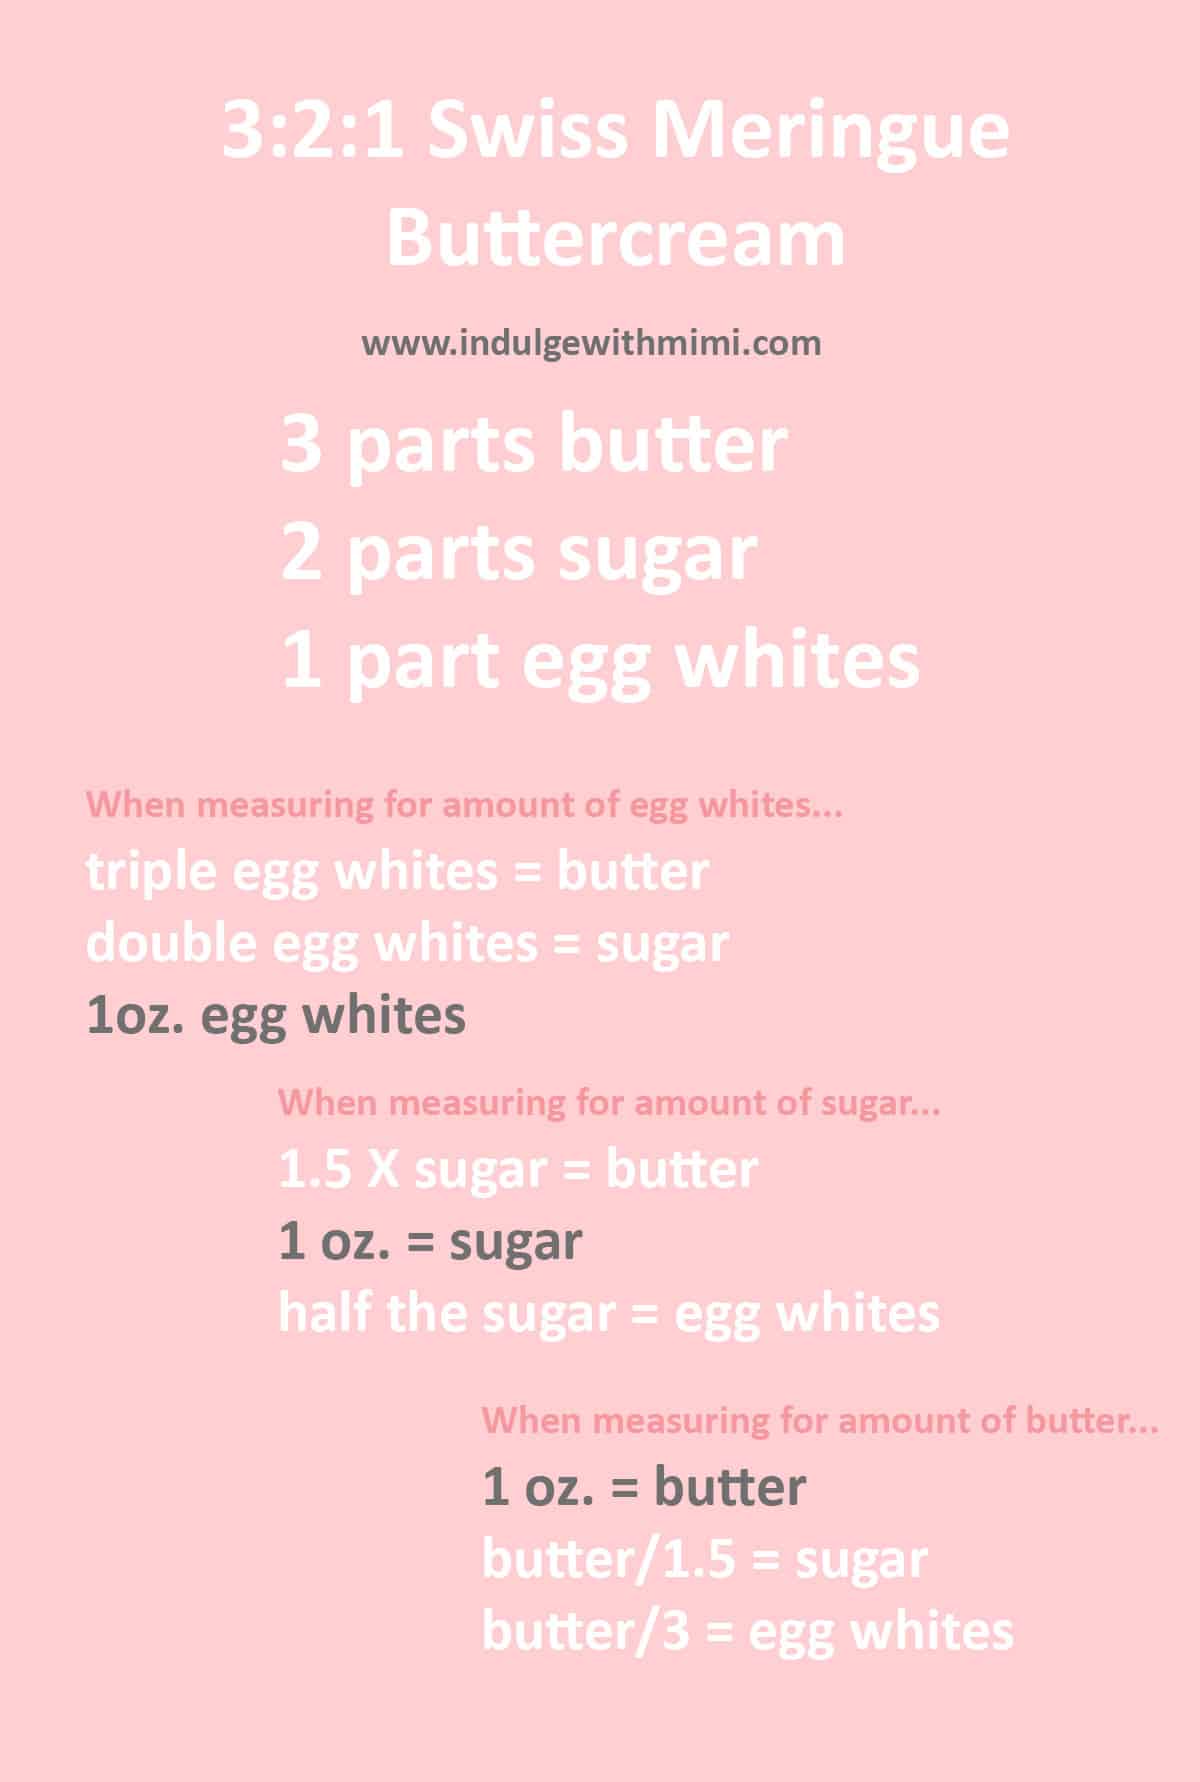 Chart showing how to adjust butter, sugar and egg whites using the 3:2:1 ratio for Swiss buttercream.